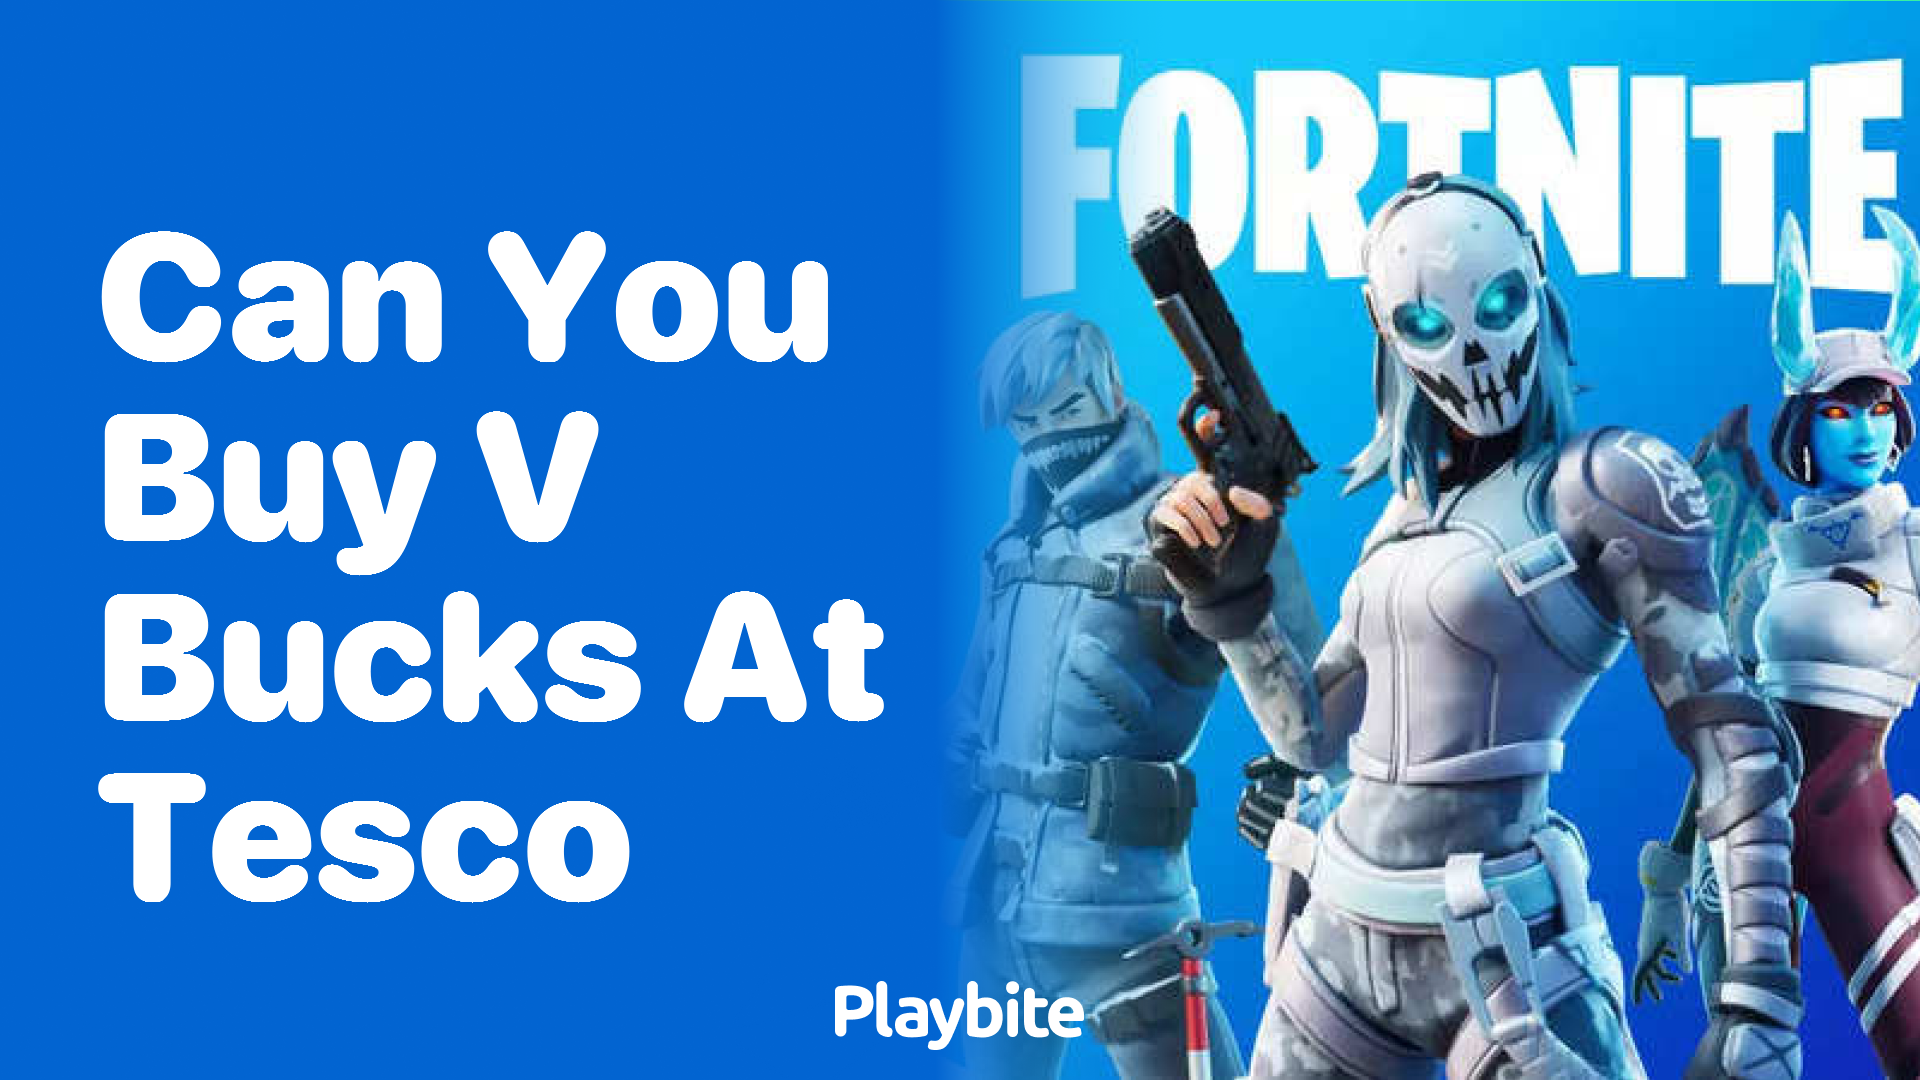 Can You Buy V-Bucks at Tesco? Find Out Here!